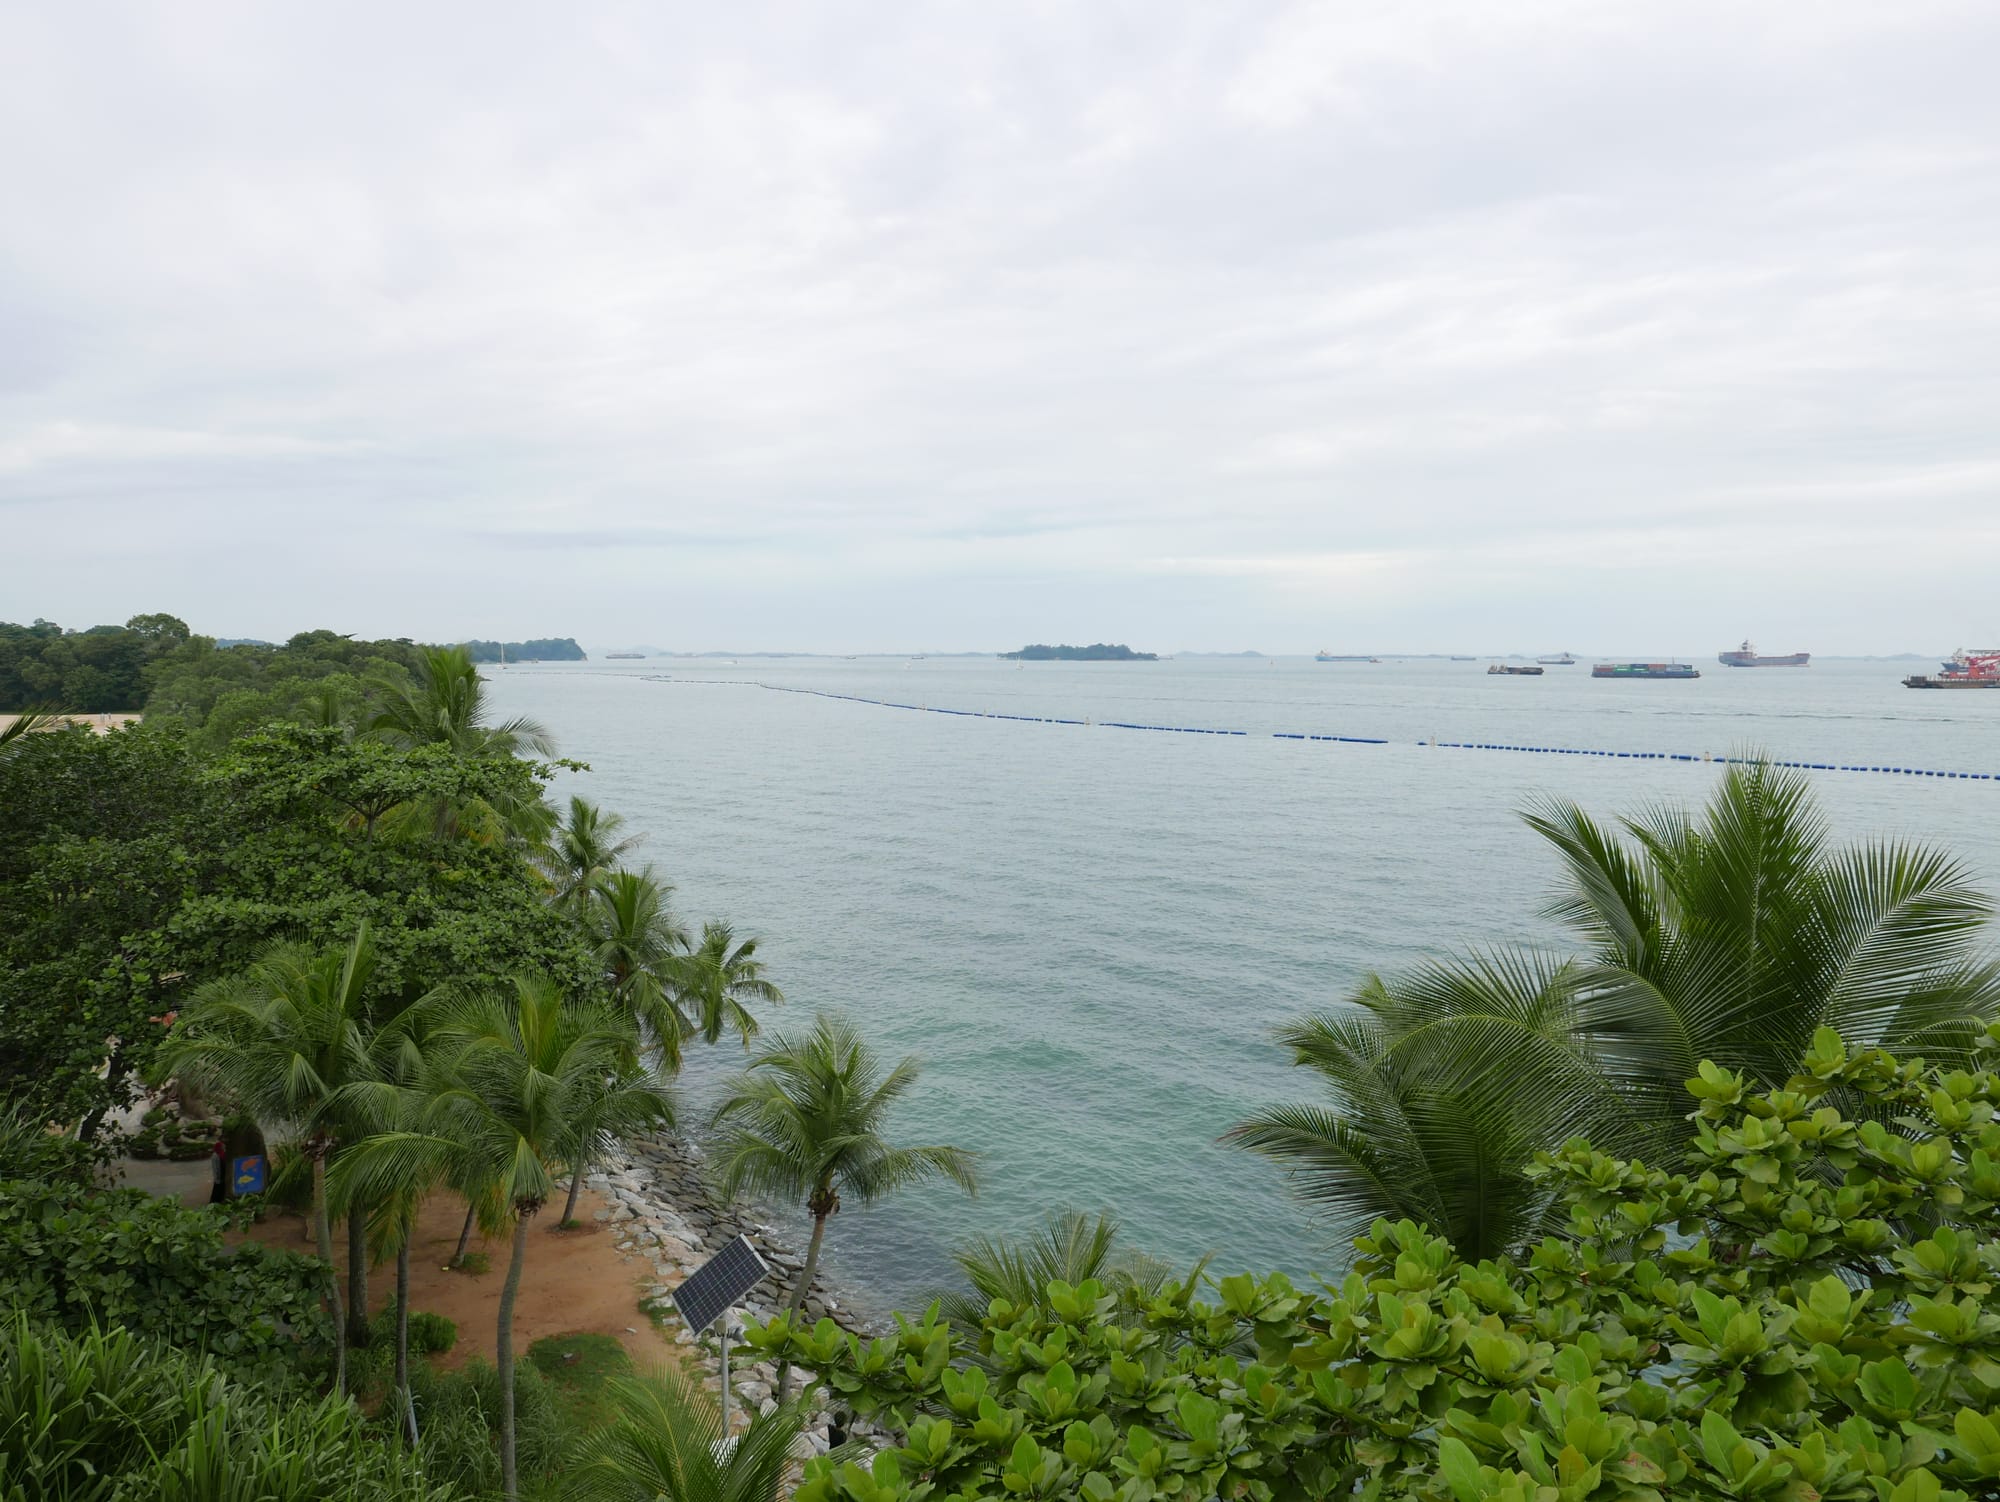 Photo by Author — looking out to sea (note all the ships) — Palawan Island, Sentosa Island, Singapore